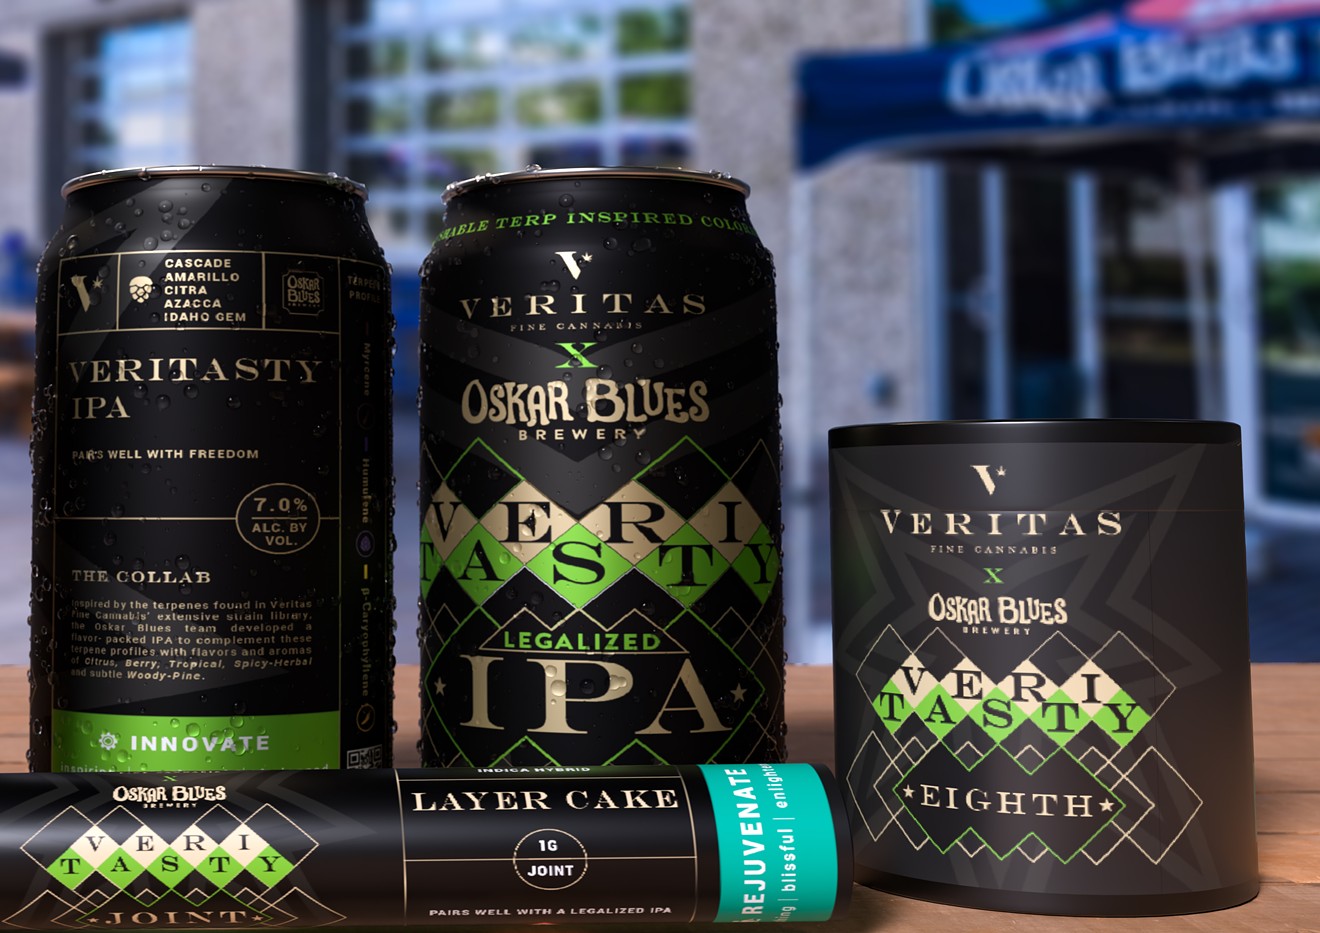 Both Oskar Blues and Veritas have released products celebrating the collaboration.